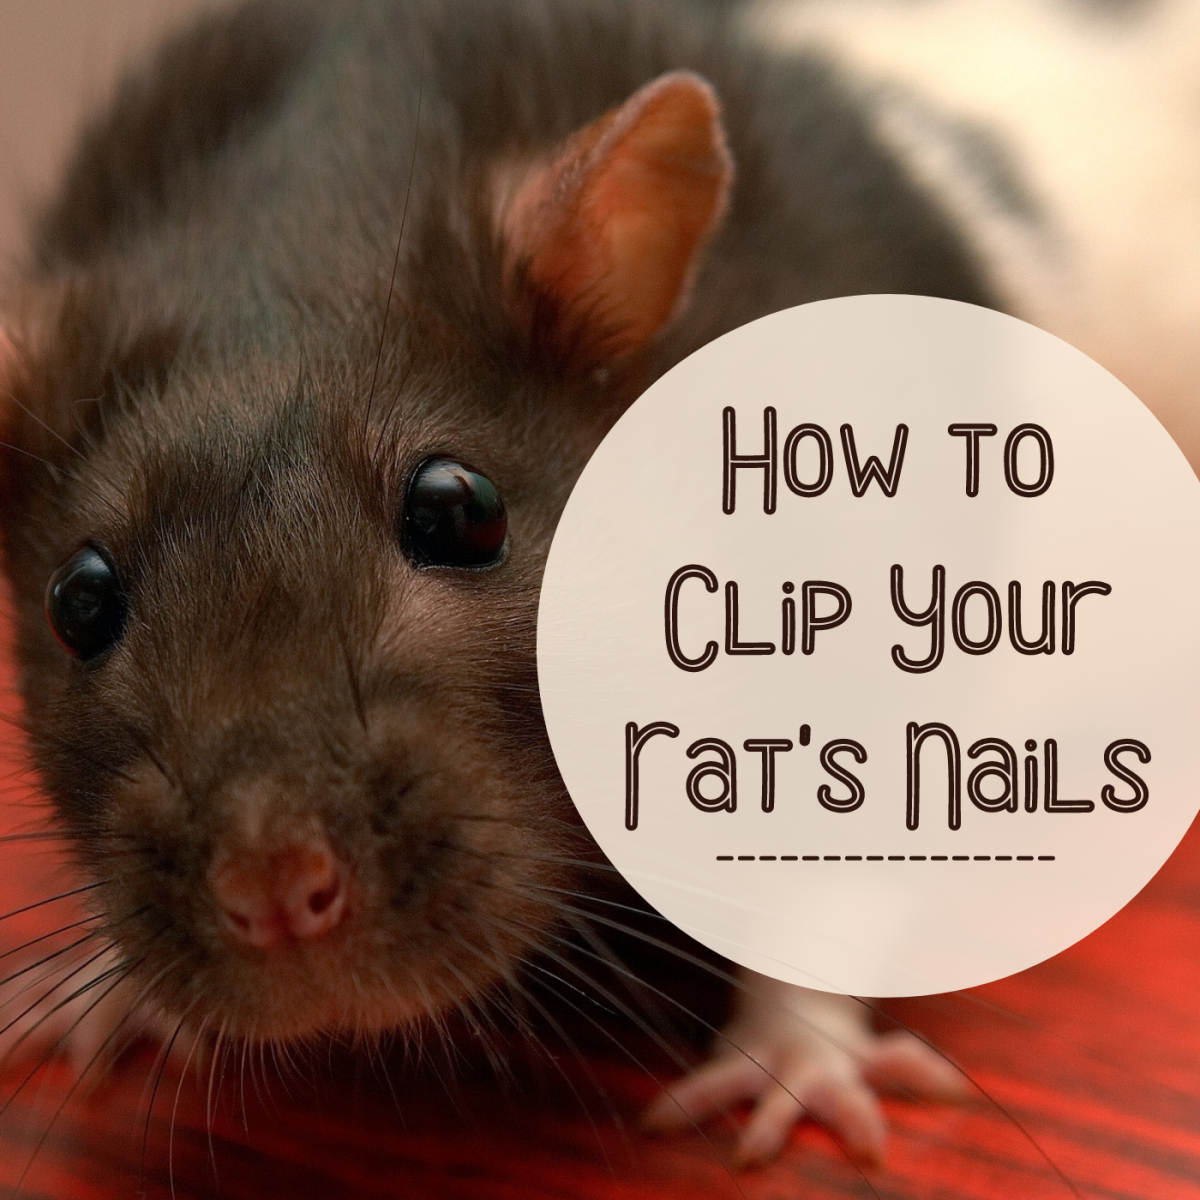 Get advice on safe nail trimming that's less stressful for your pet!